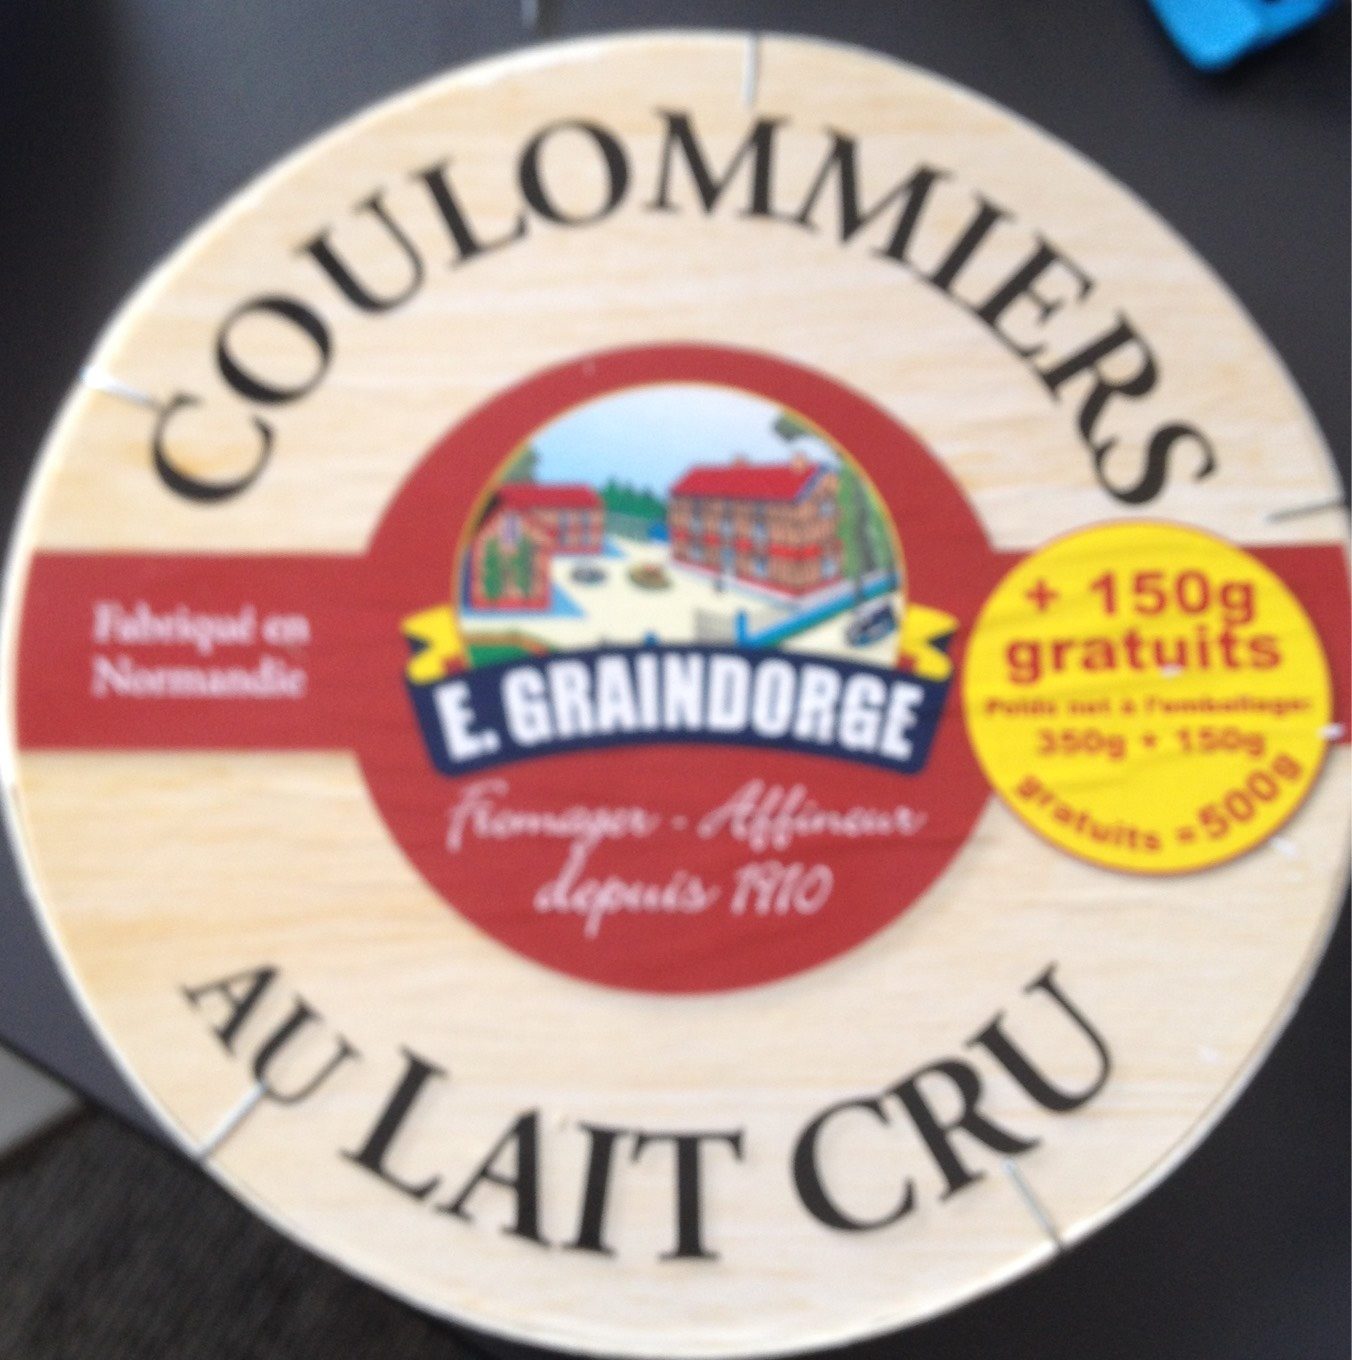 Coulommiers (23% MG) - Product - fr